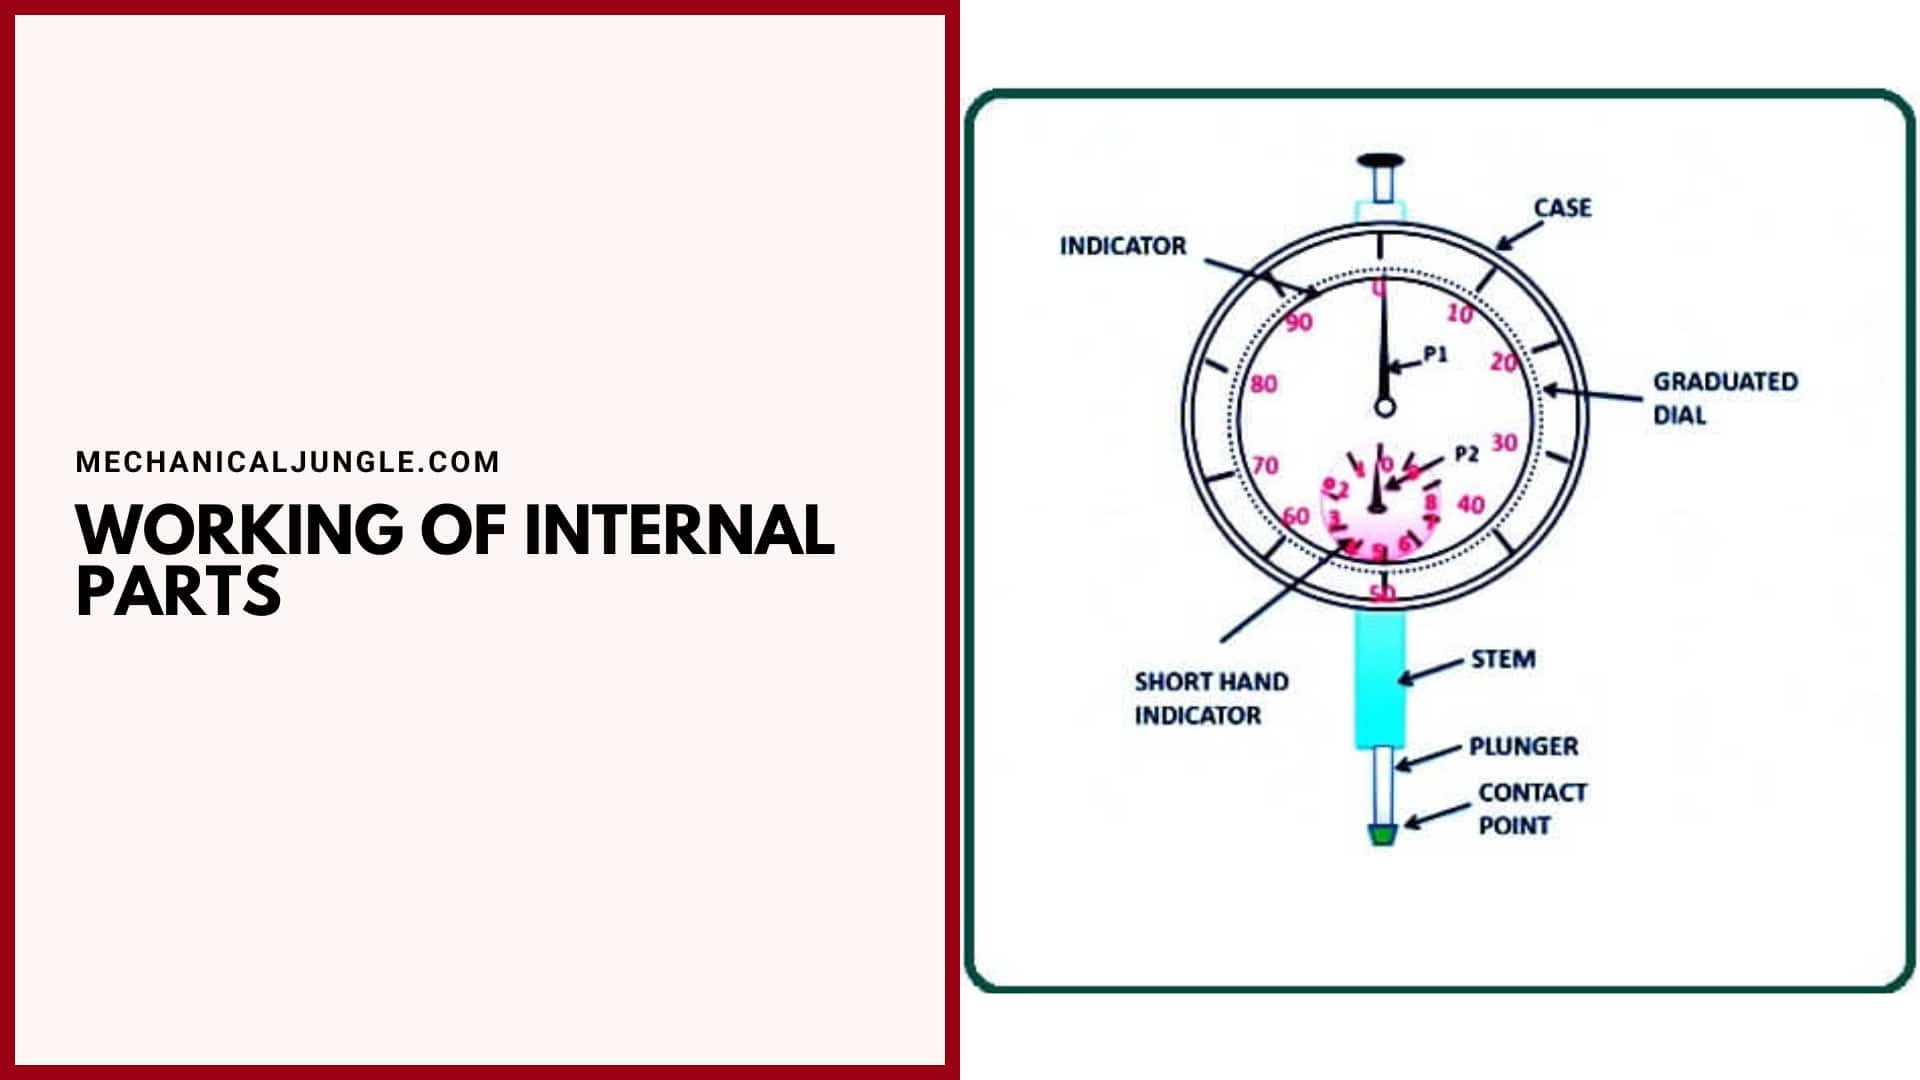 Working of Internal Parts